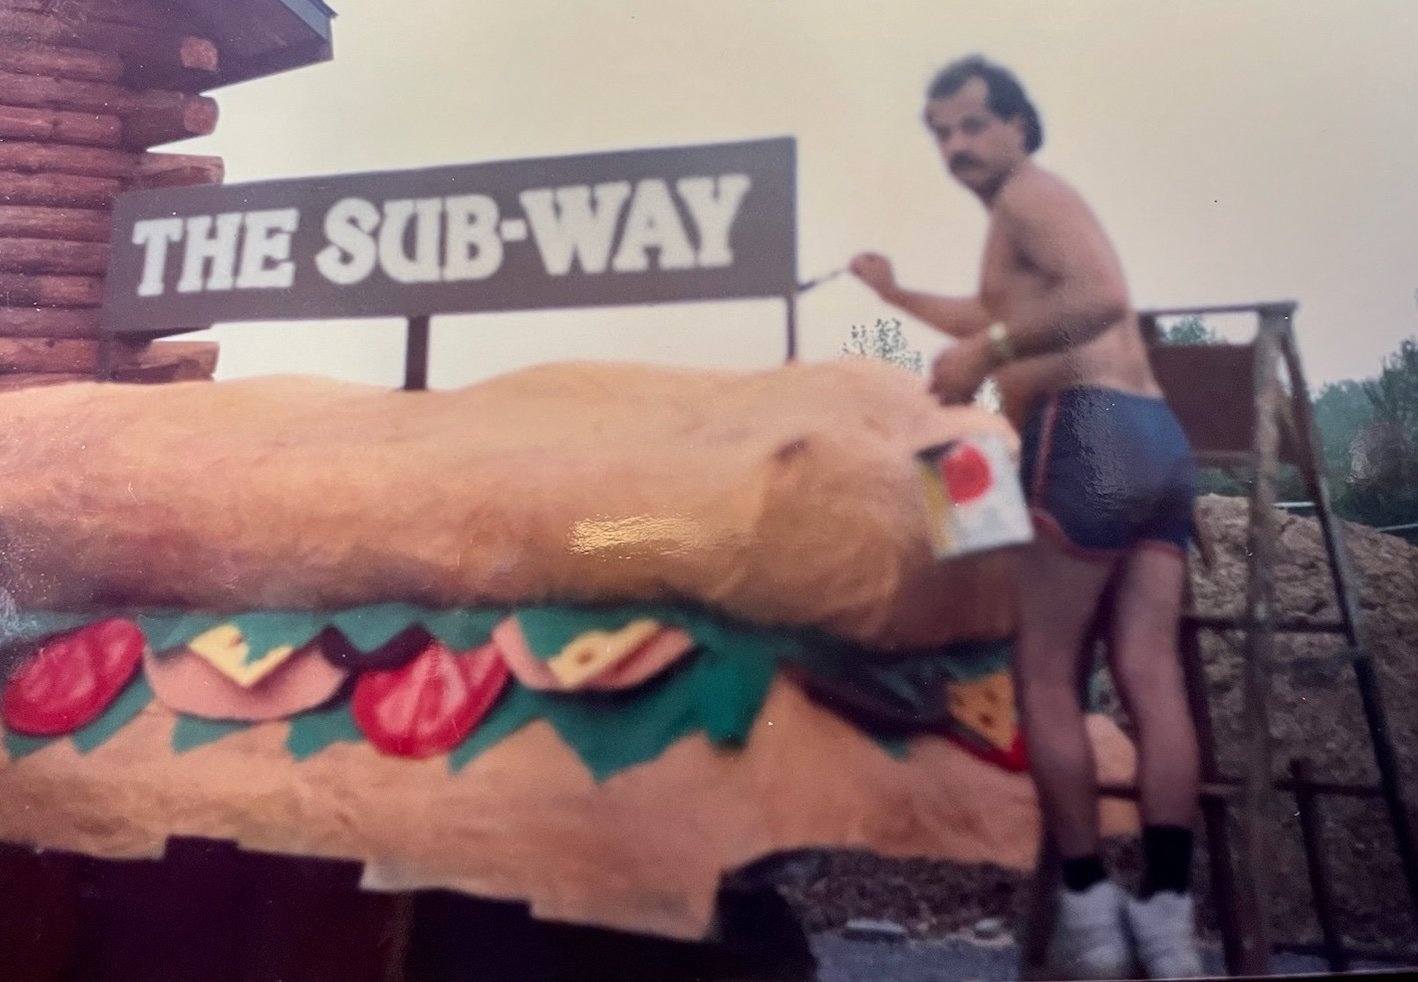 Rich Cianfrocco, owner of what was known then as The Sub-Way sandwich shop on East Dominick St., is seen making his paper mache' submarine sandwich float that was entered into Rome's annual Honor America Days Parade. Rich passed away in June of 2017 at the age of 67.